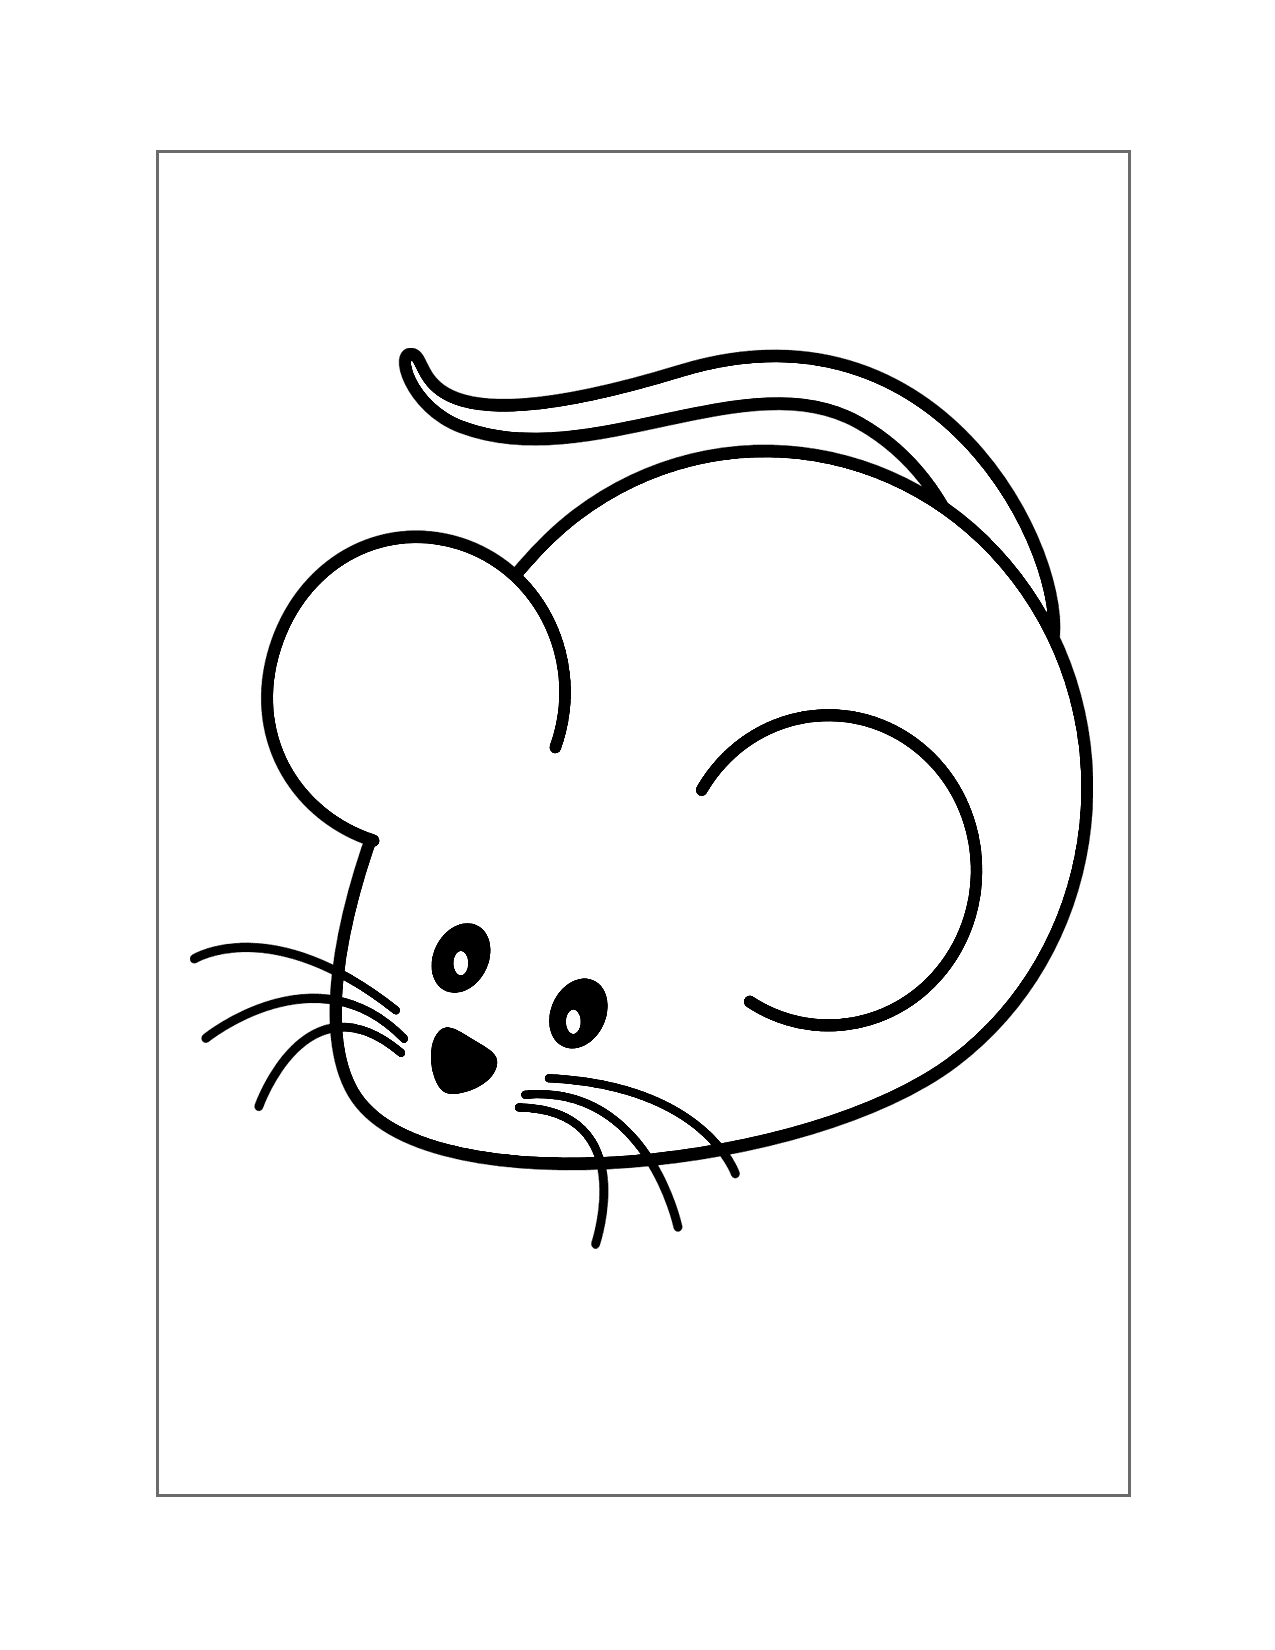 Mouse Cartoon Coloring Page